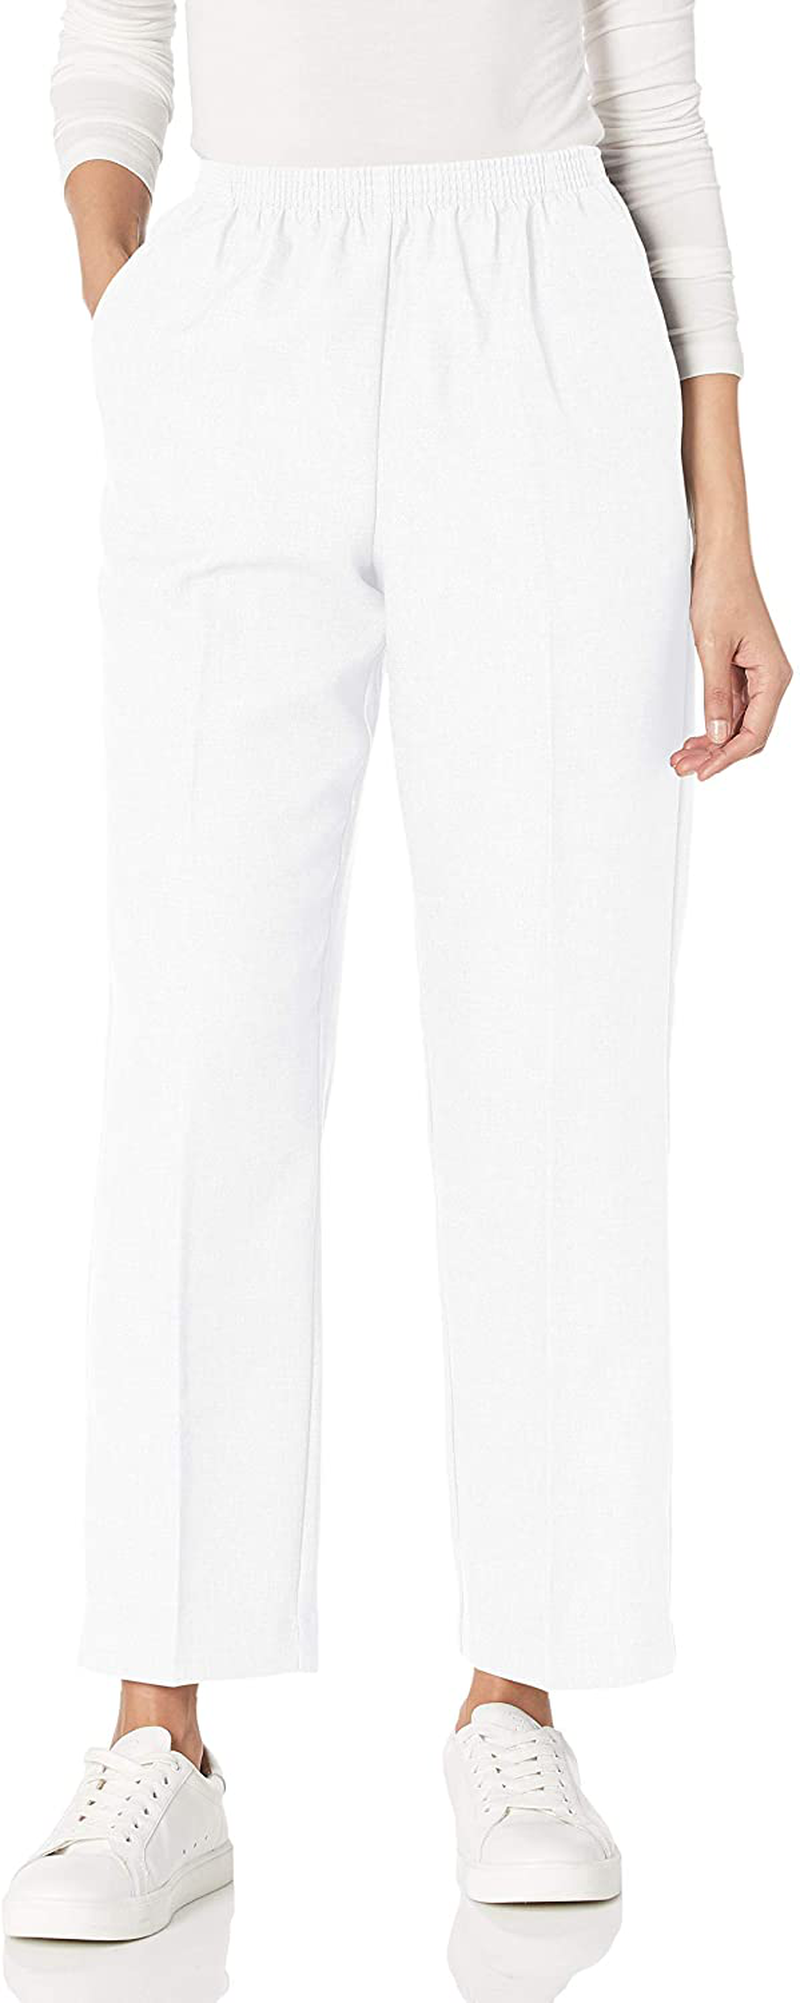 Alfred Dunner Women's All Around Elastic Waist Polyester Petite Pants Poly Proportioned Medium